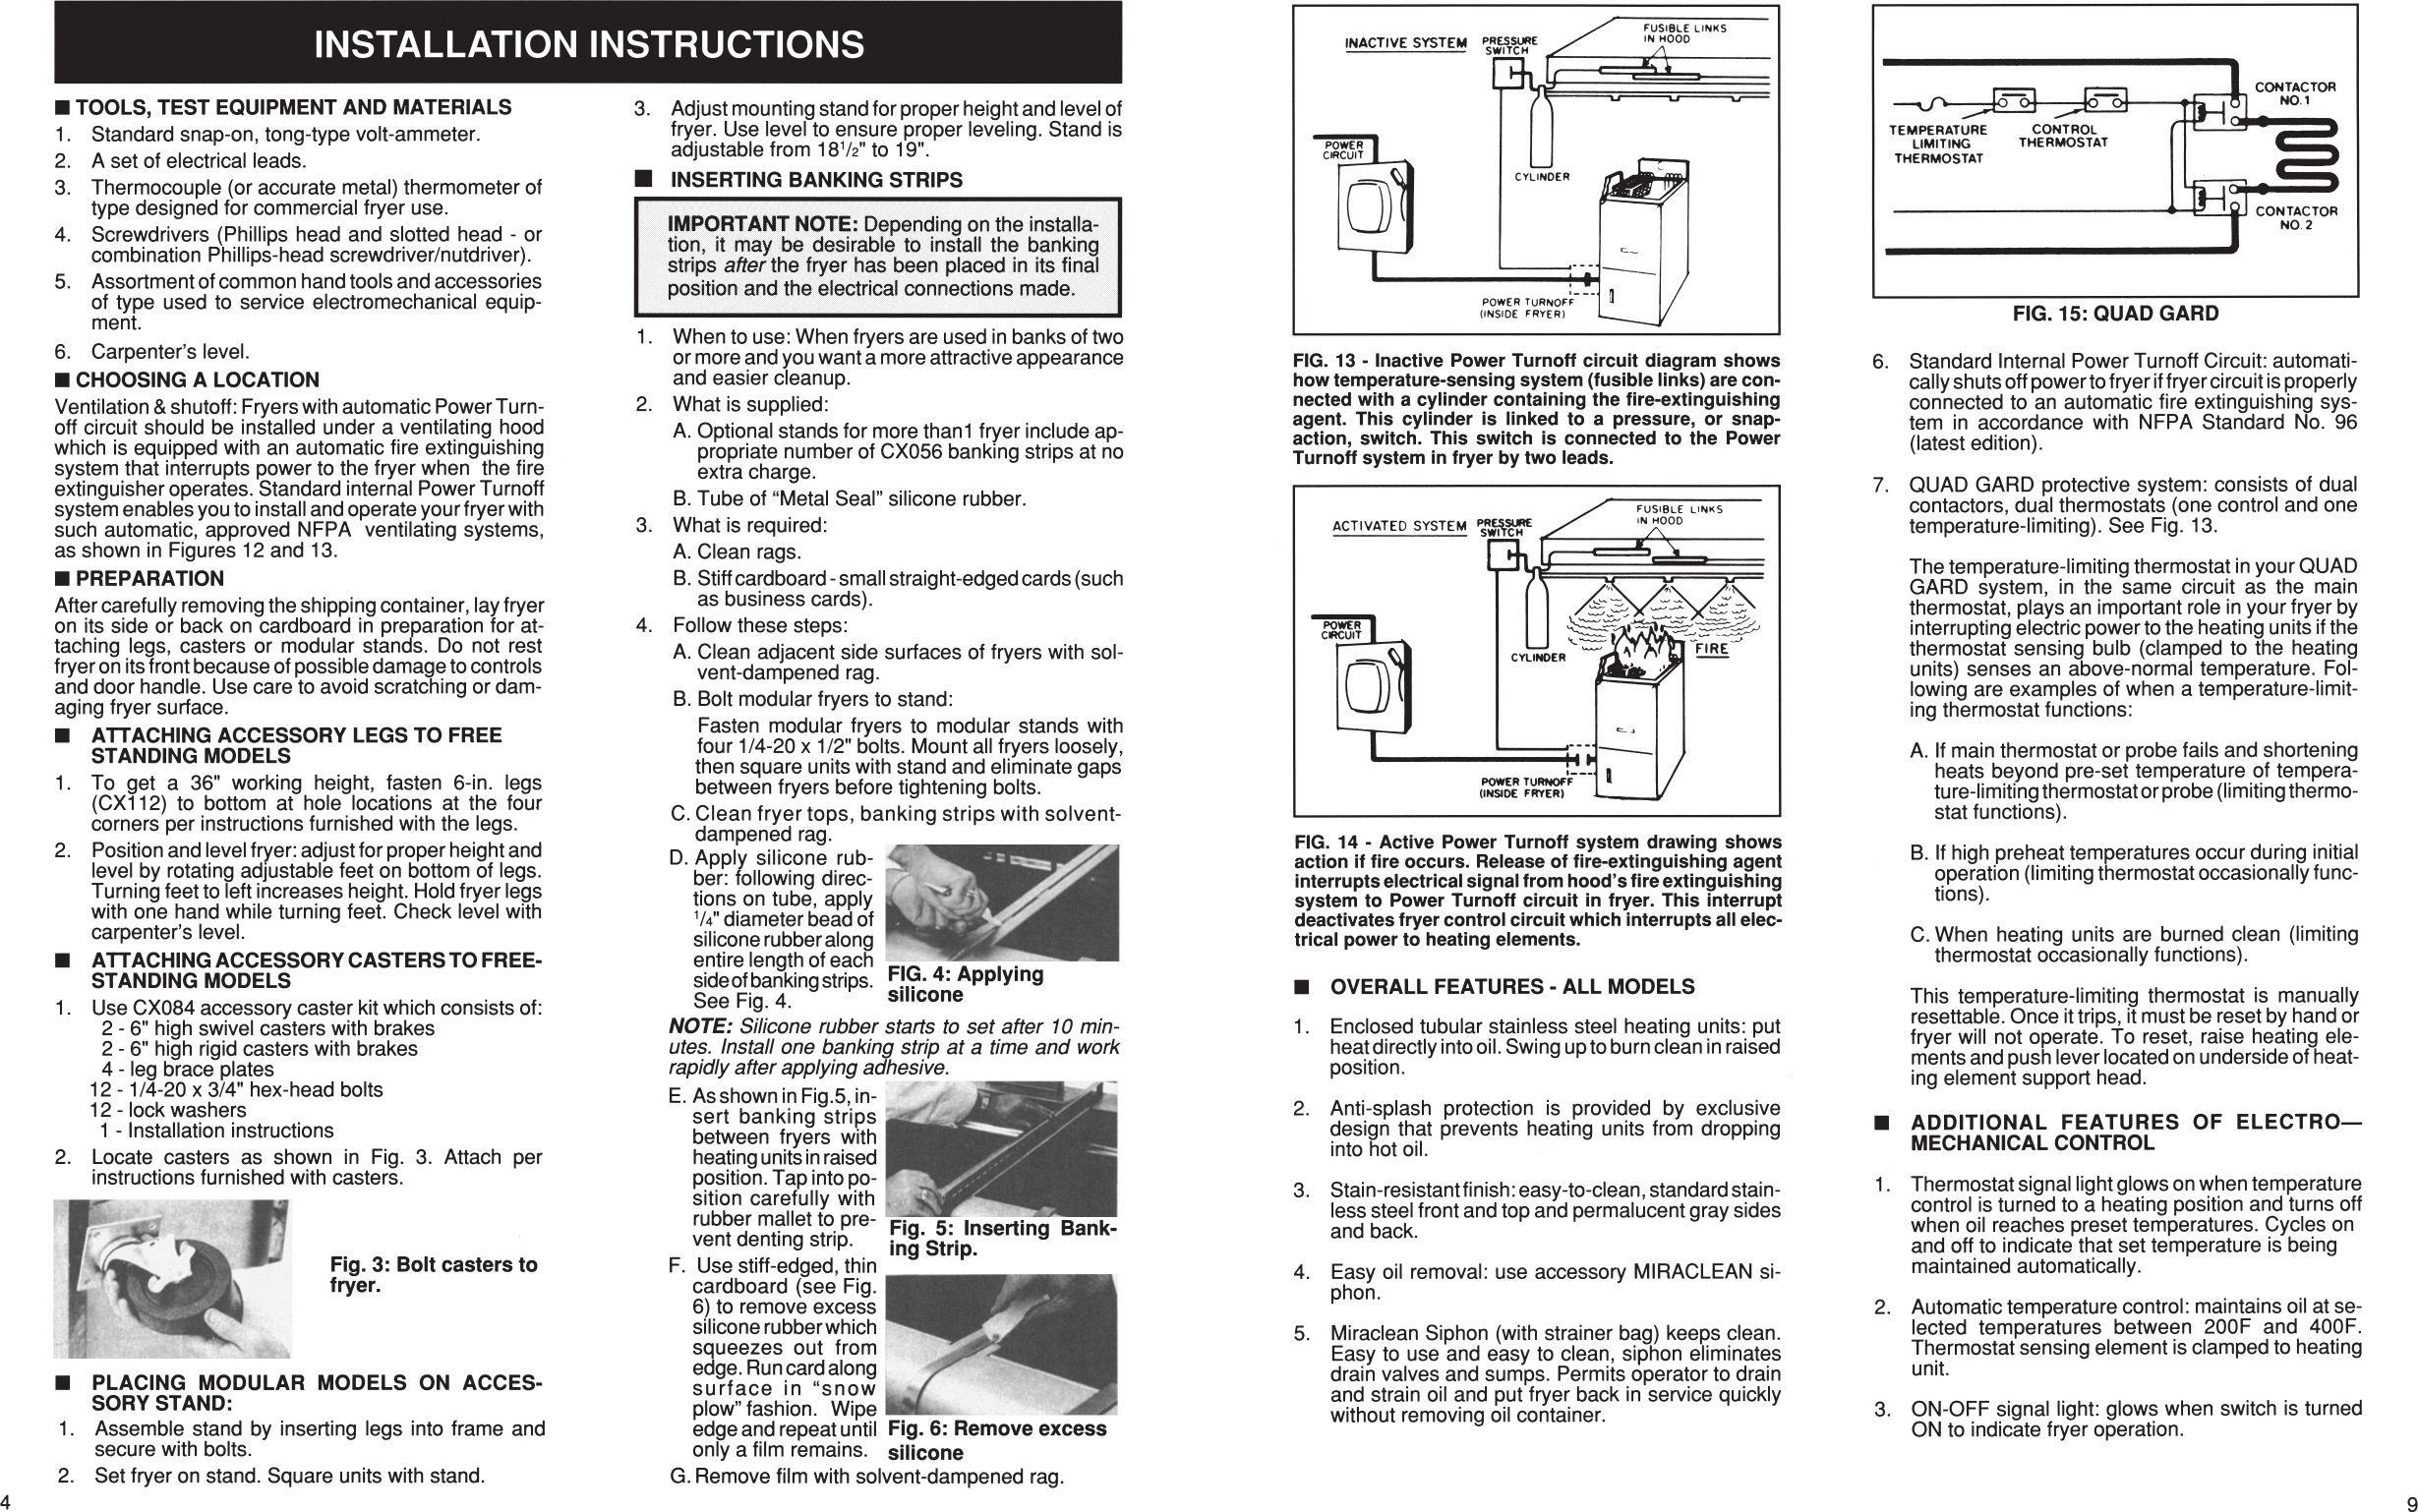 Page 4 of 12 - Hobart Hobart-Corp-Fryer-Ck40-Users-Manual- F27400  Hobart-corp-fryer-ck40-users-manual